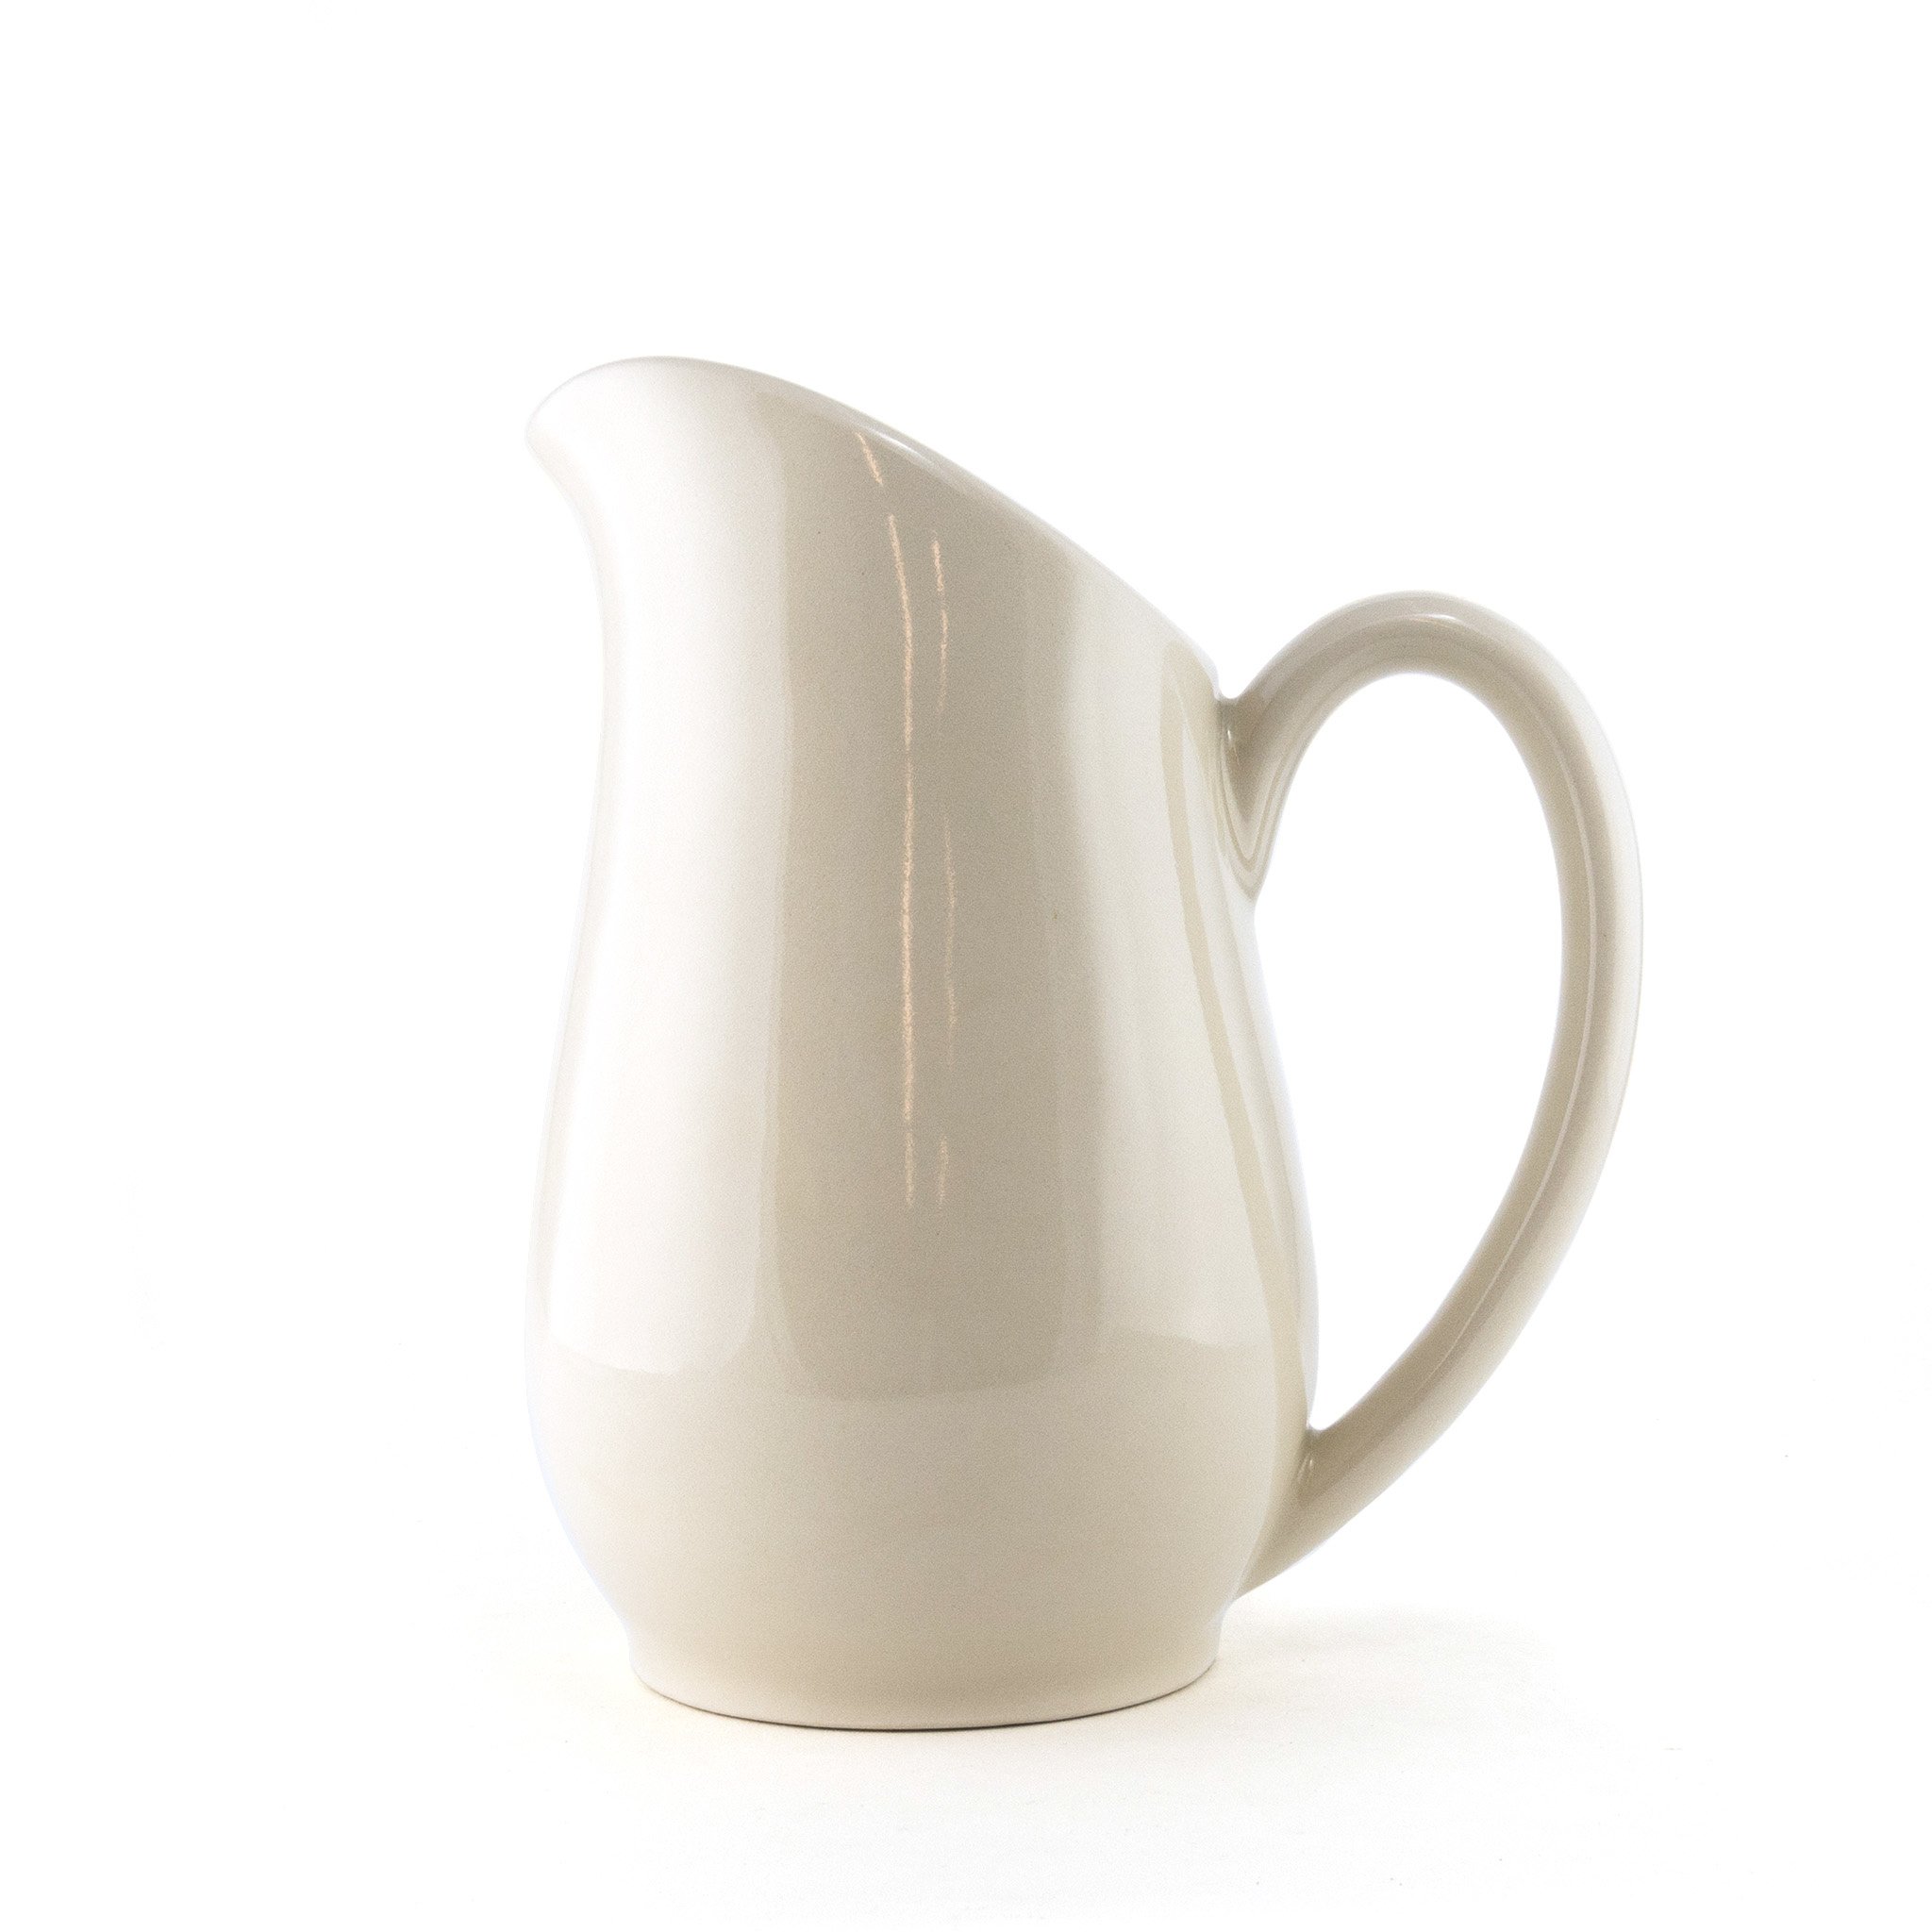 Medalta Ware Reproduction Pitcher